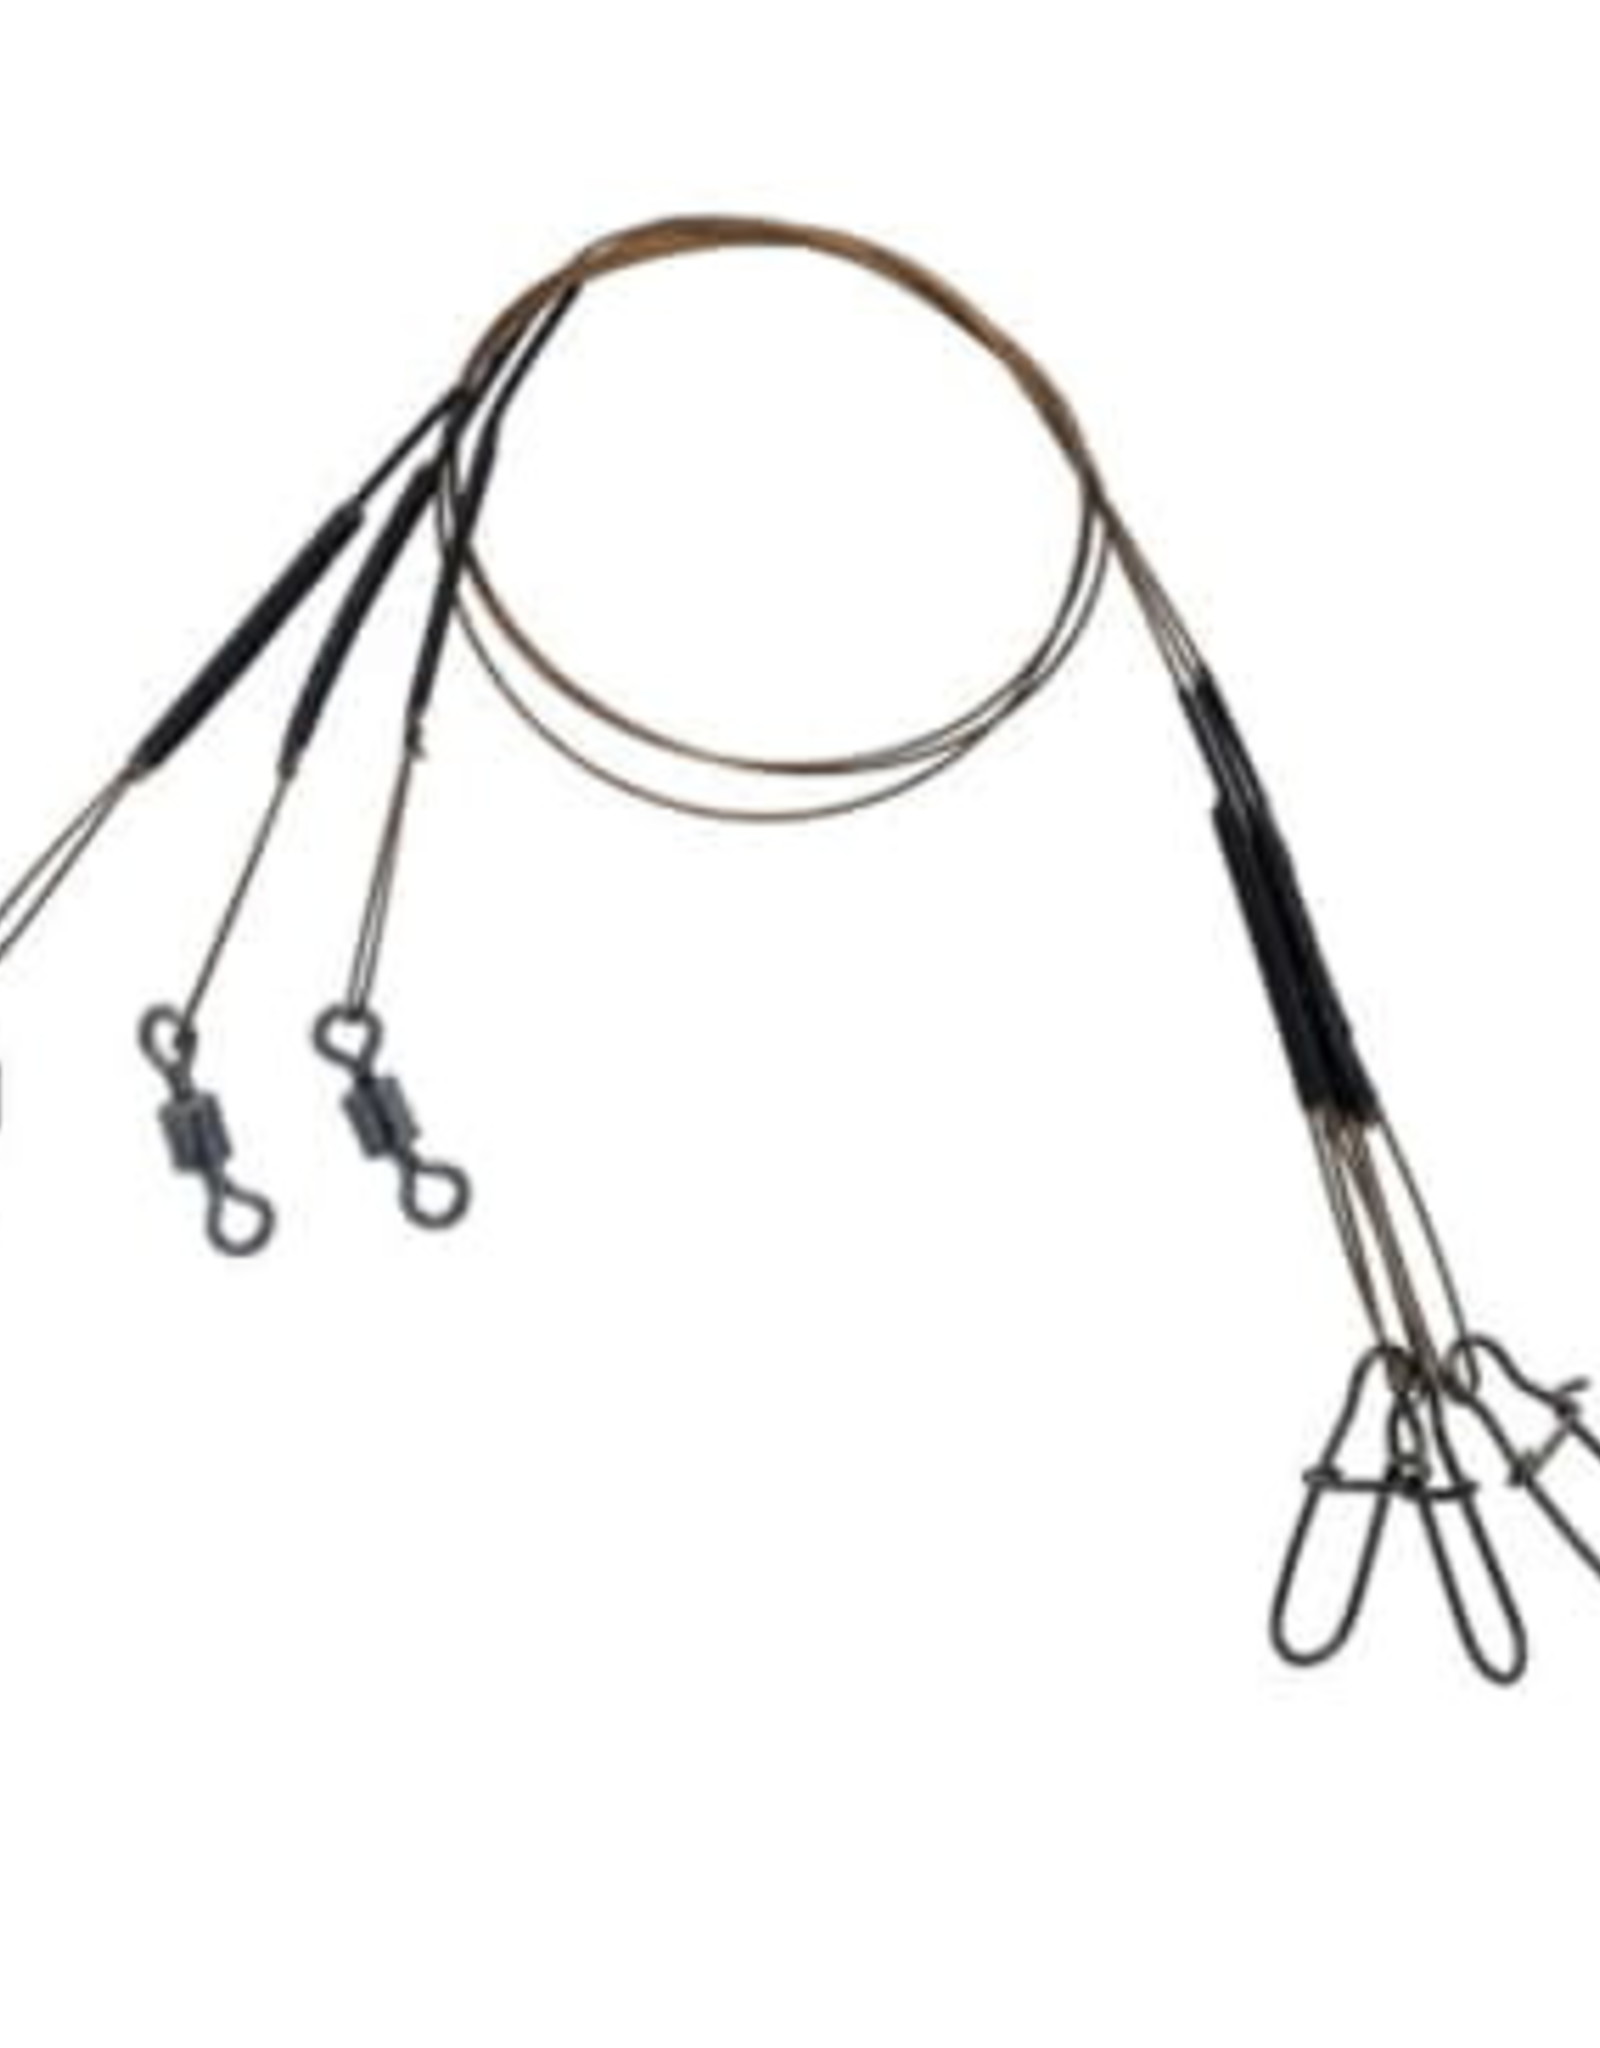 Eagle Claw Wire Leader